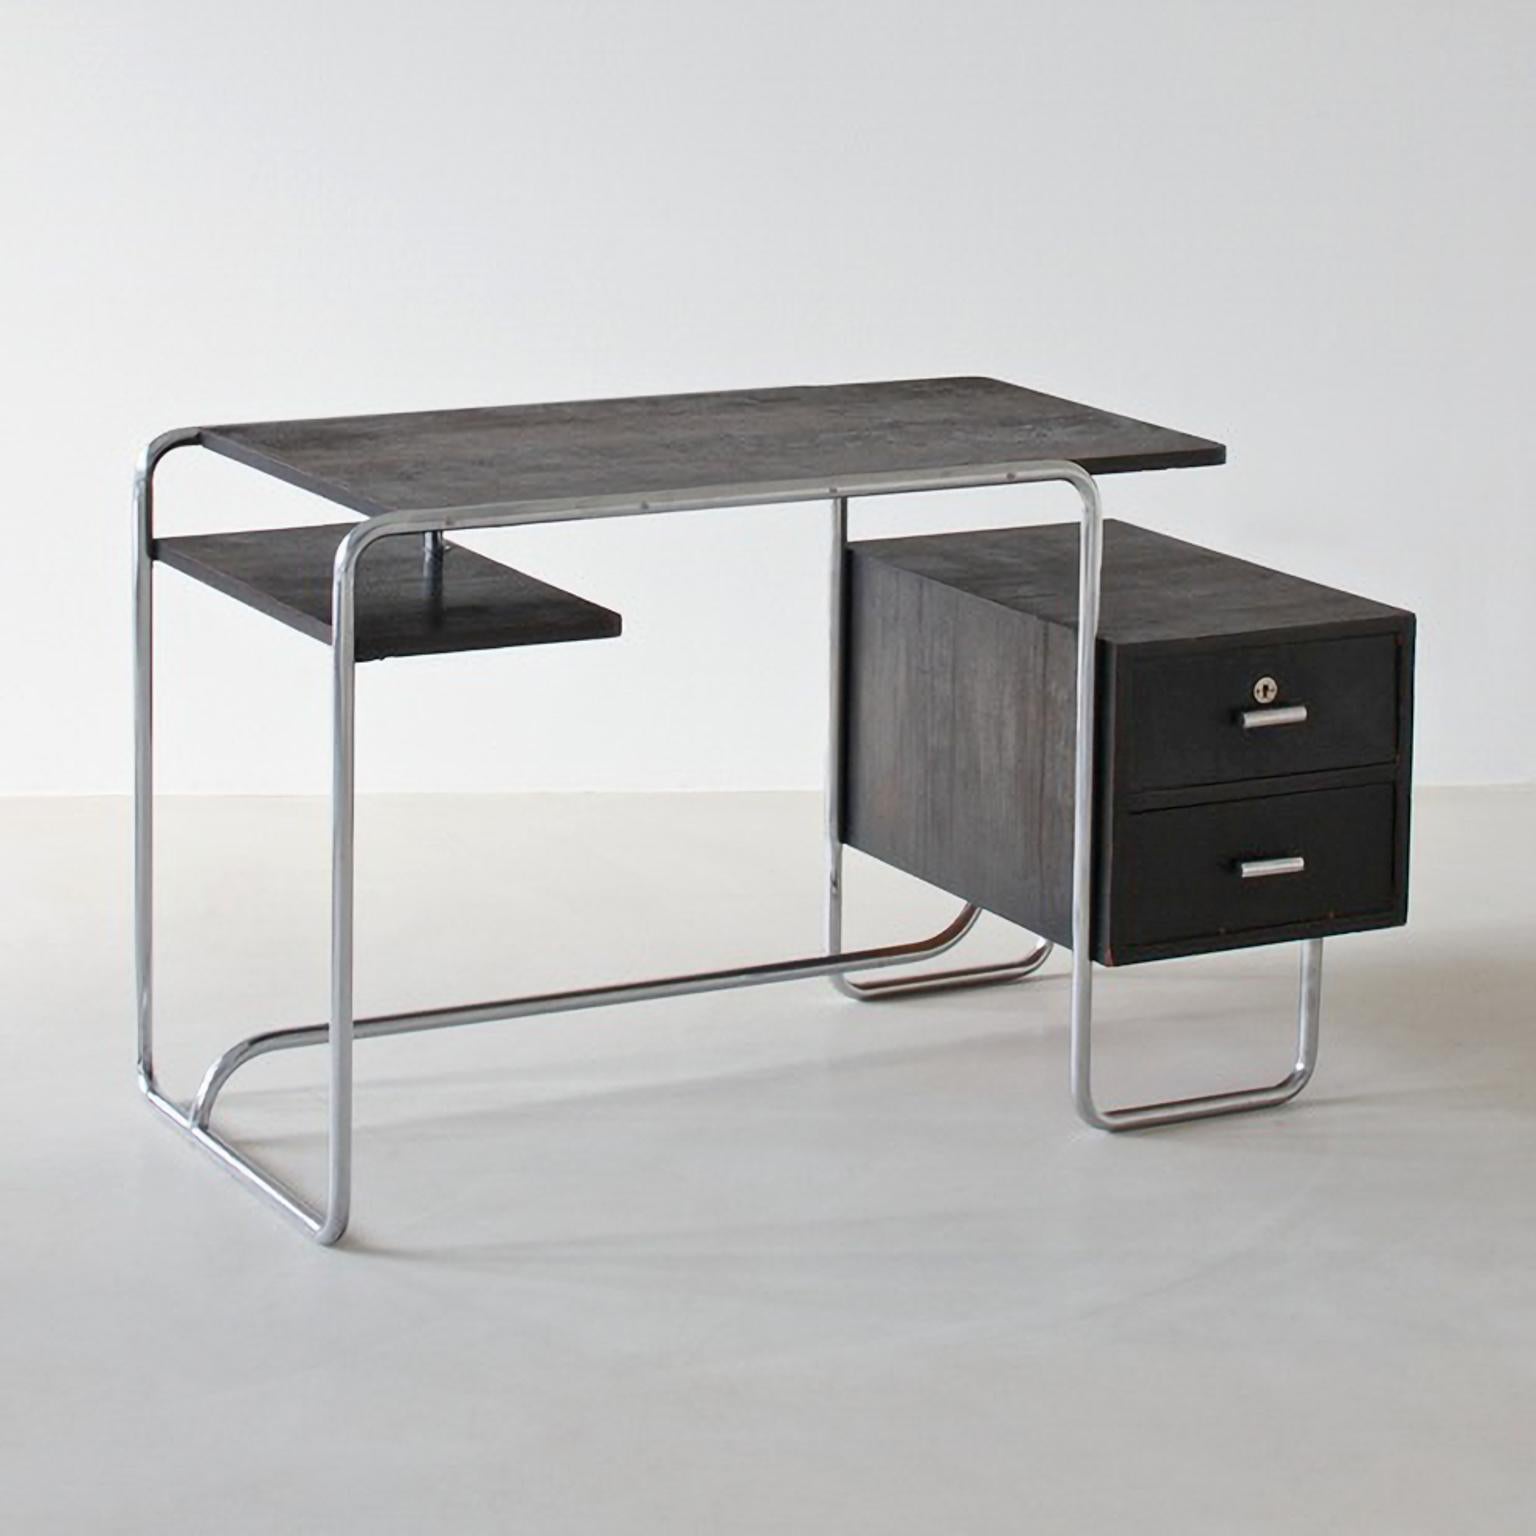 Modernist tubular steel desk model PS 10, stained wood, chromium plated metal, c. 1930. The wood finish can be customized.

This desk is restored on request, delivery time 8-10 weeks.